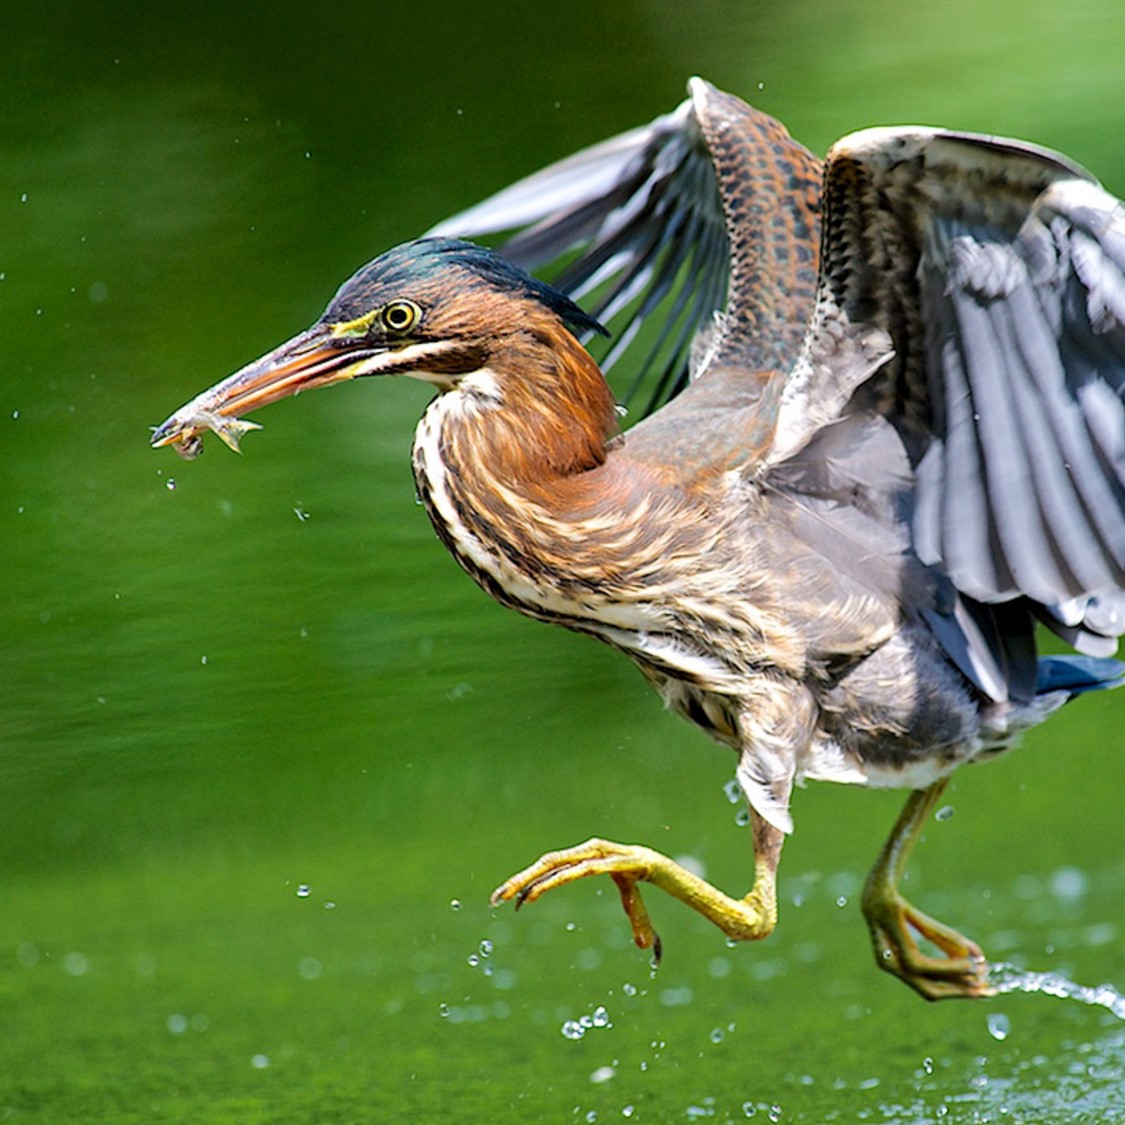 A Green Heron looks as if it's skipping on the water's surface with a small fish in its beak.